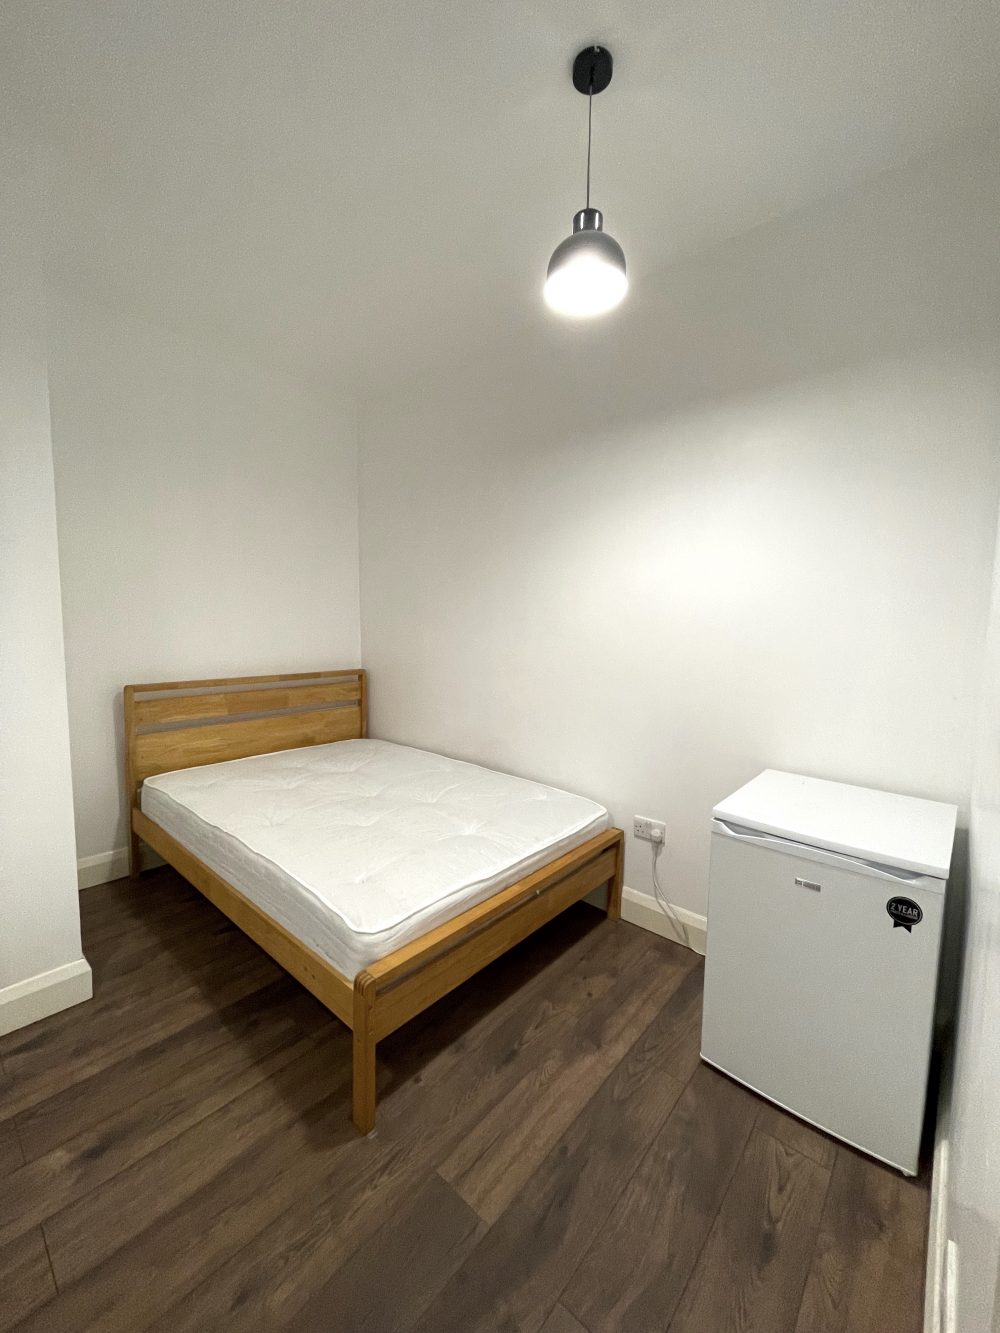 Creative live work style Studio flat Available to rent in E3 Hackney Wick Wick Lane Pic2